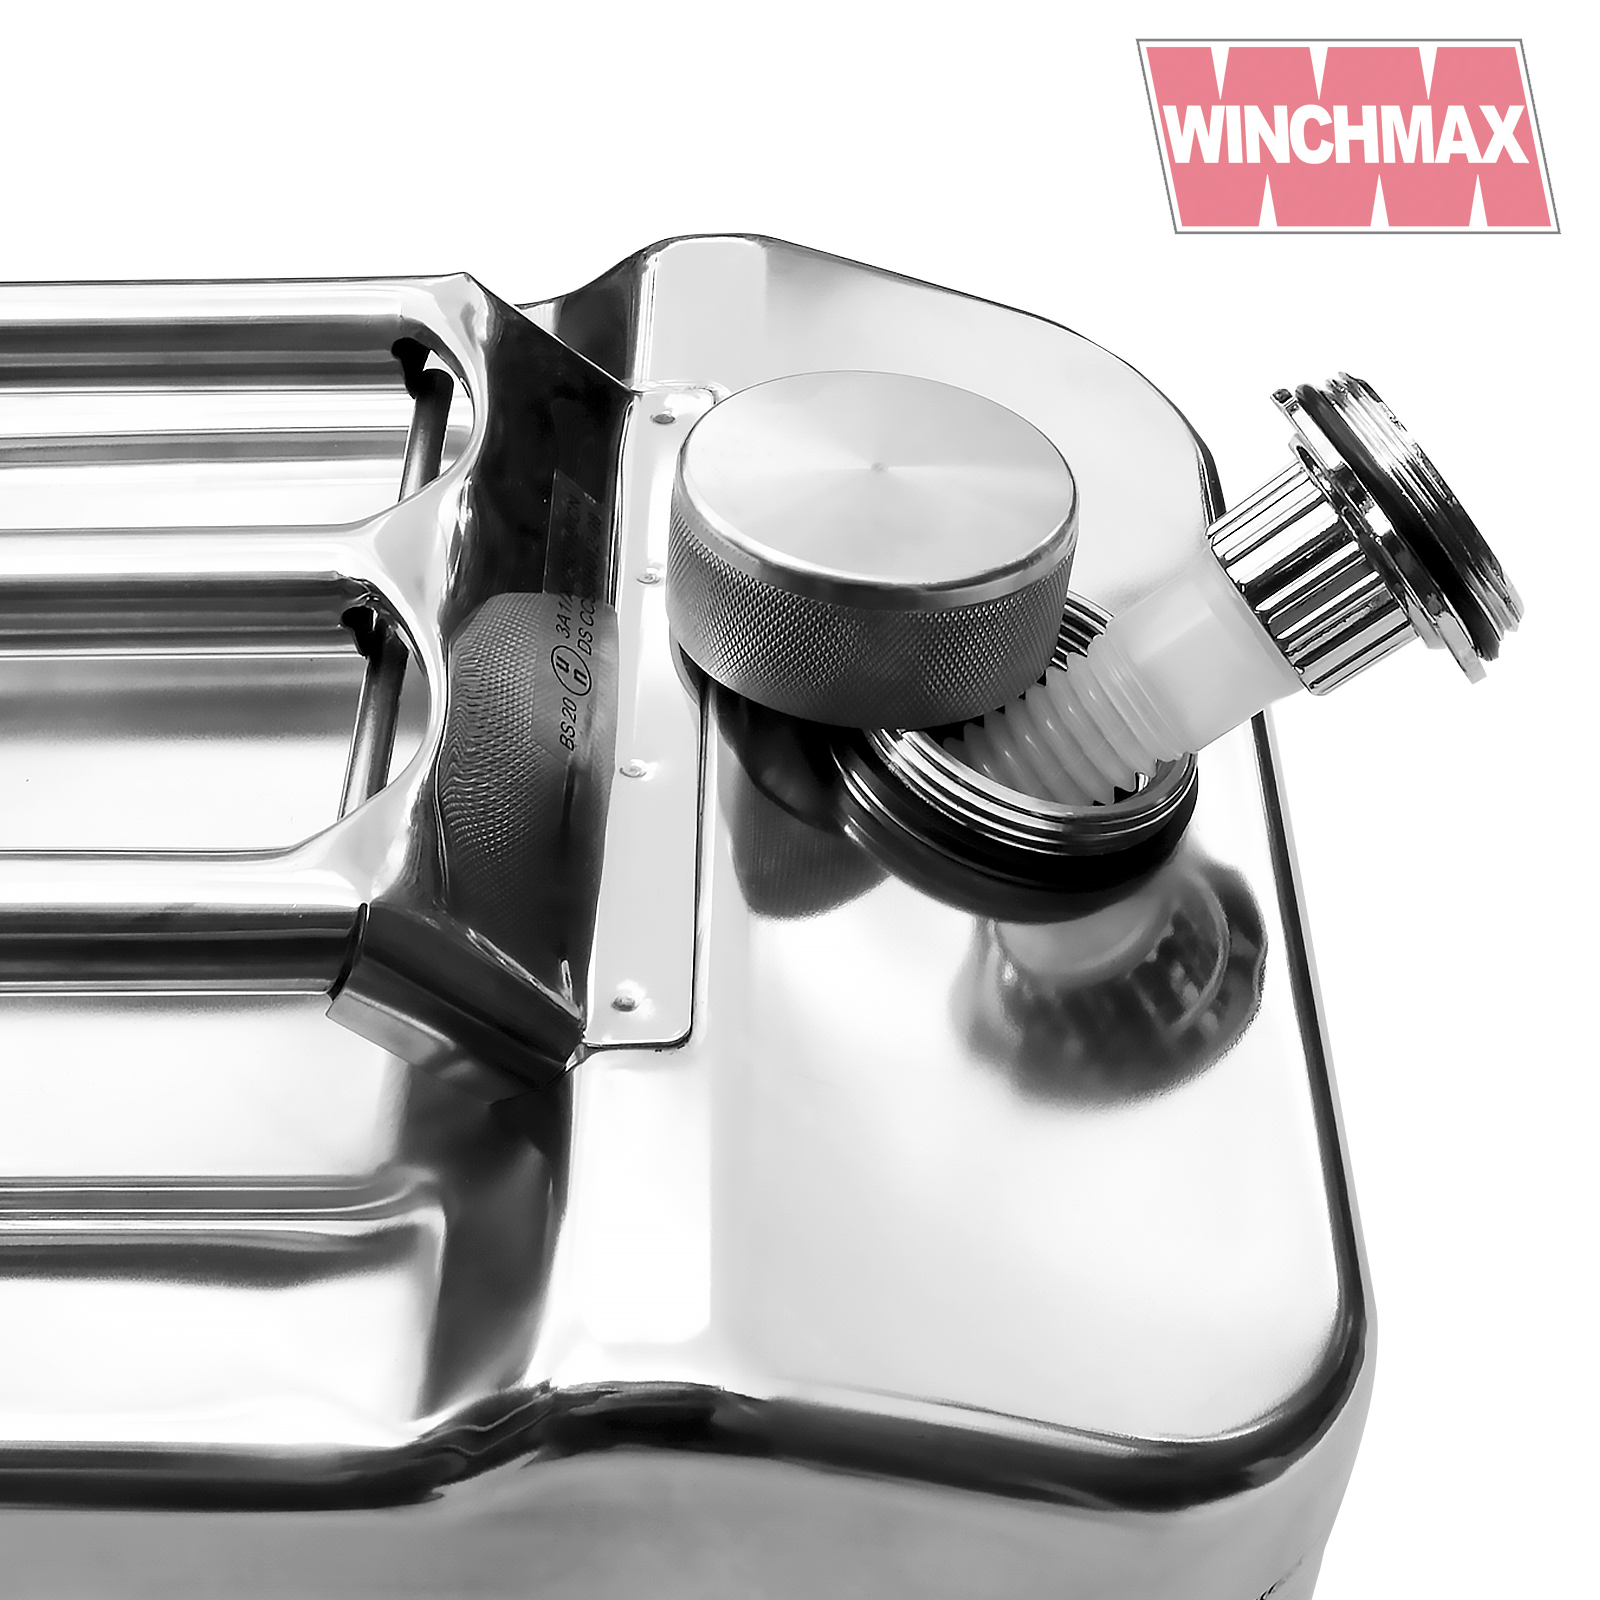 Winchmax 20l Compact Jerry Can